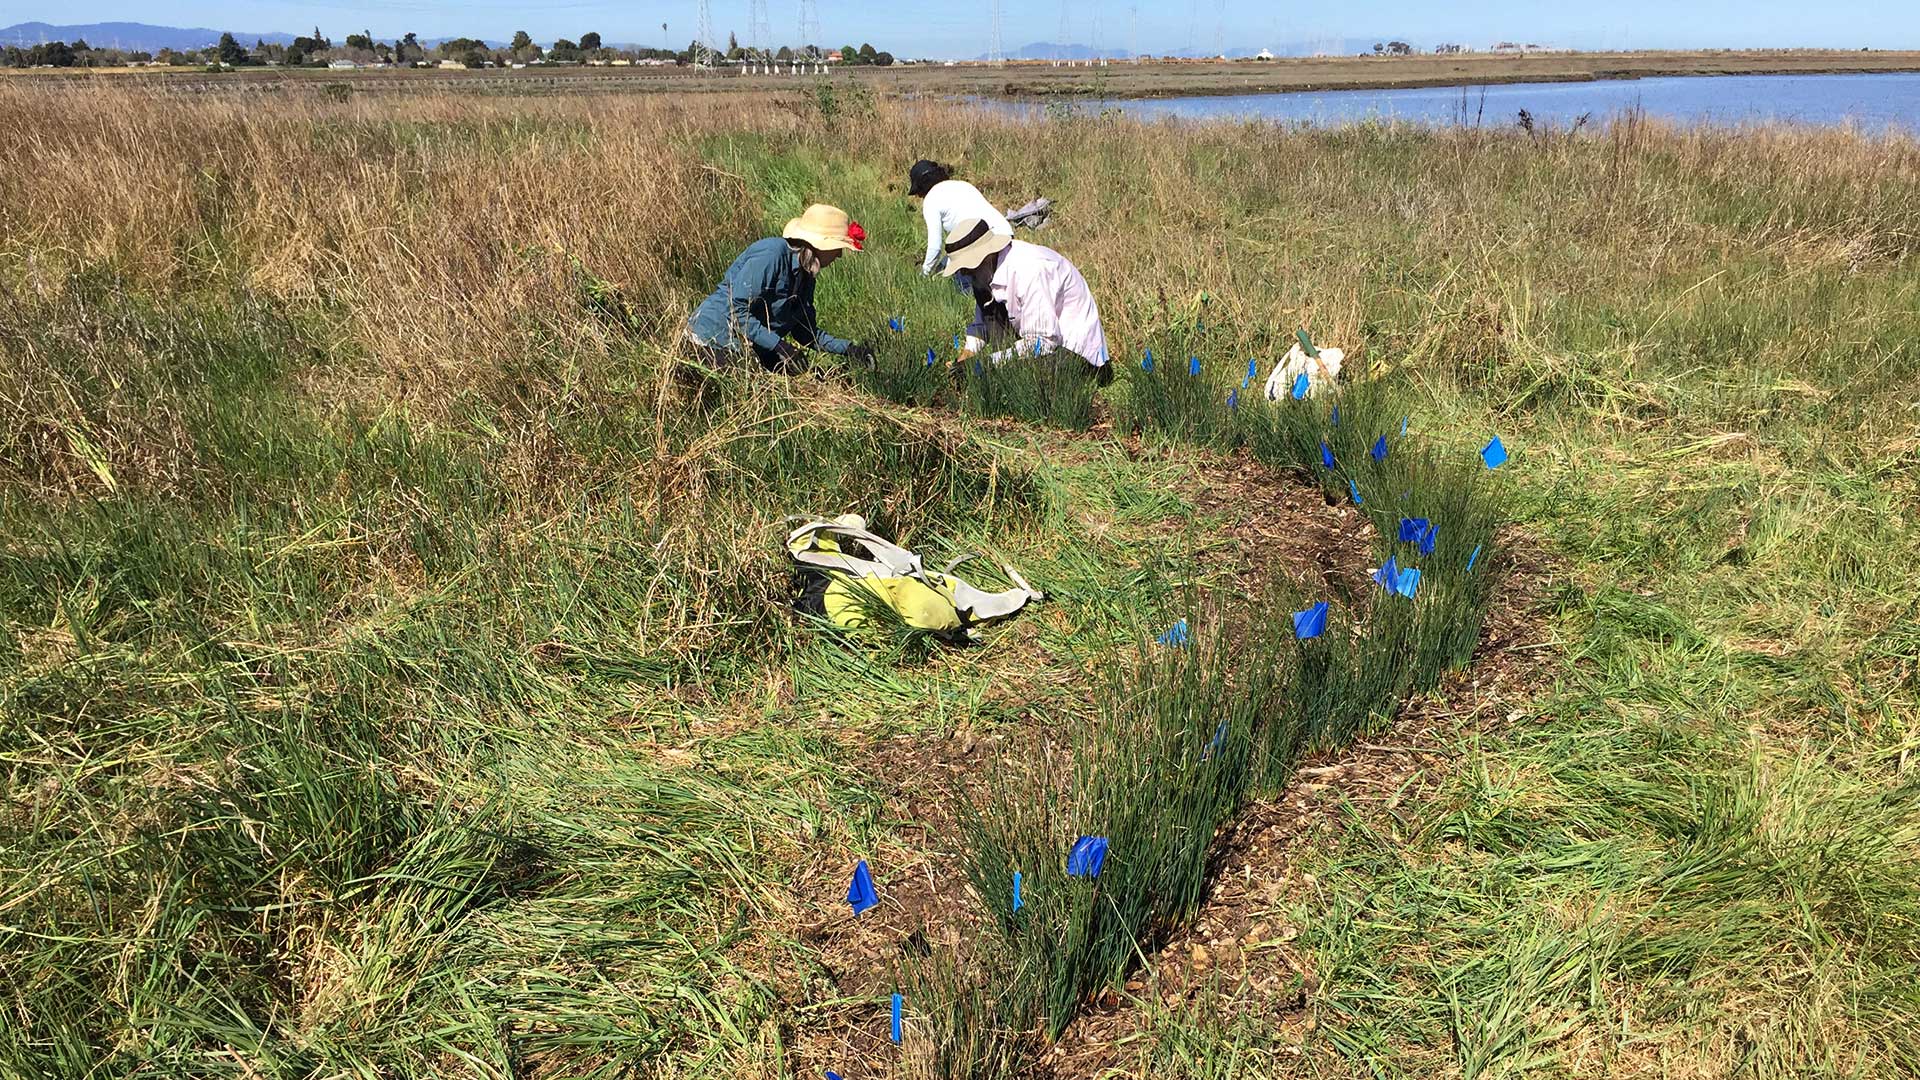 Removing weeds around the Juncus at Cooley Landing.